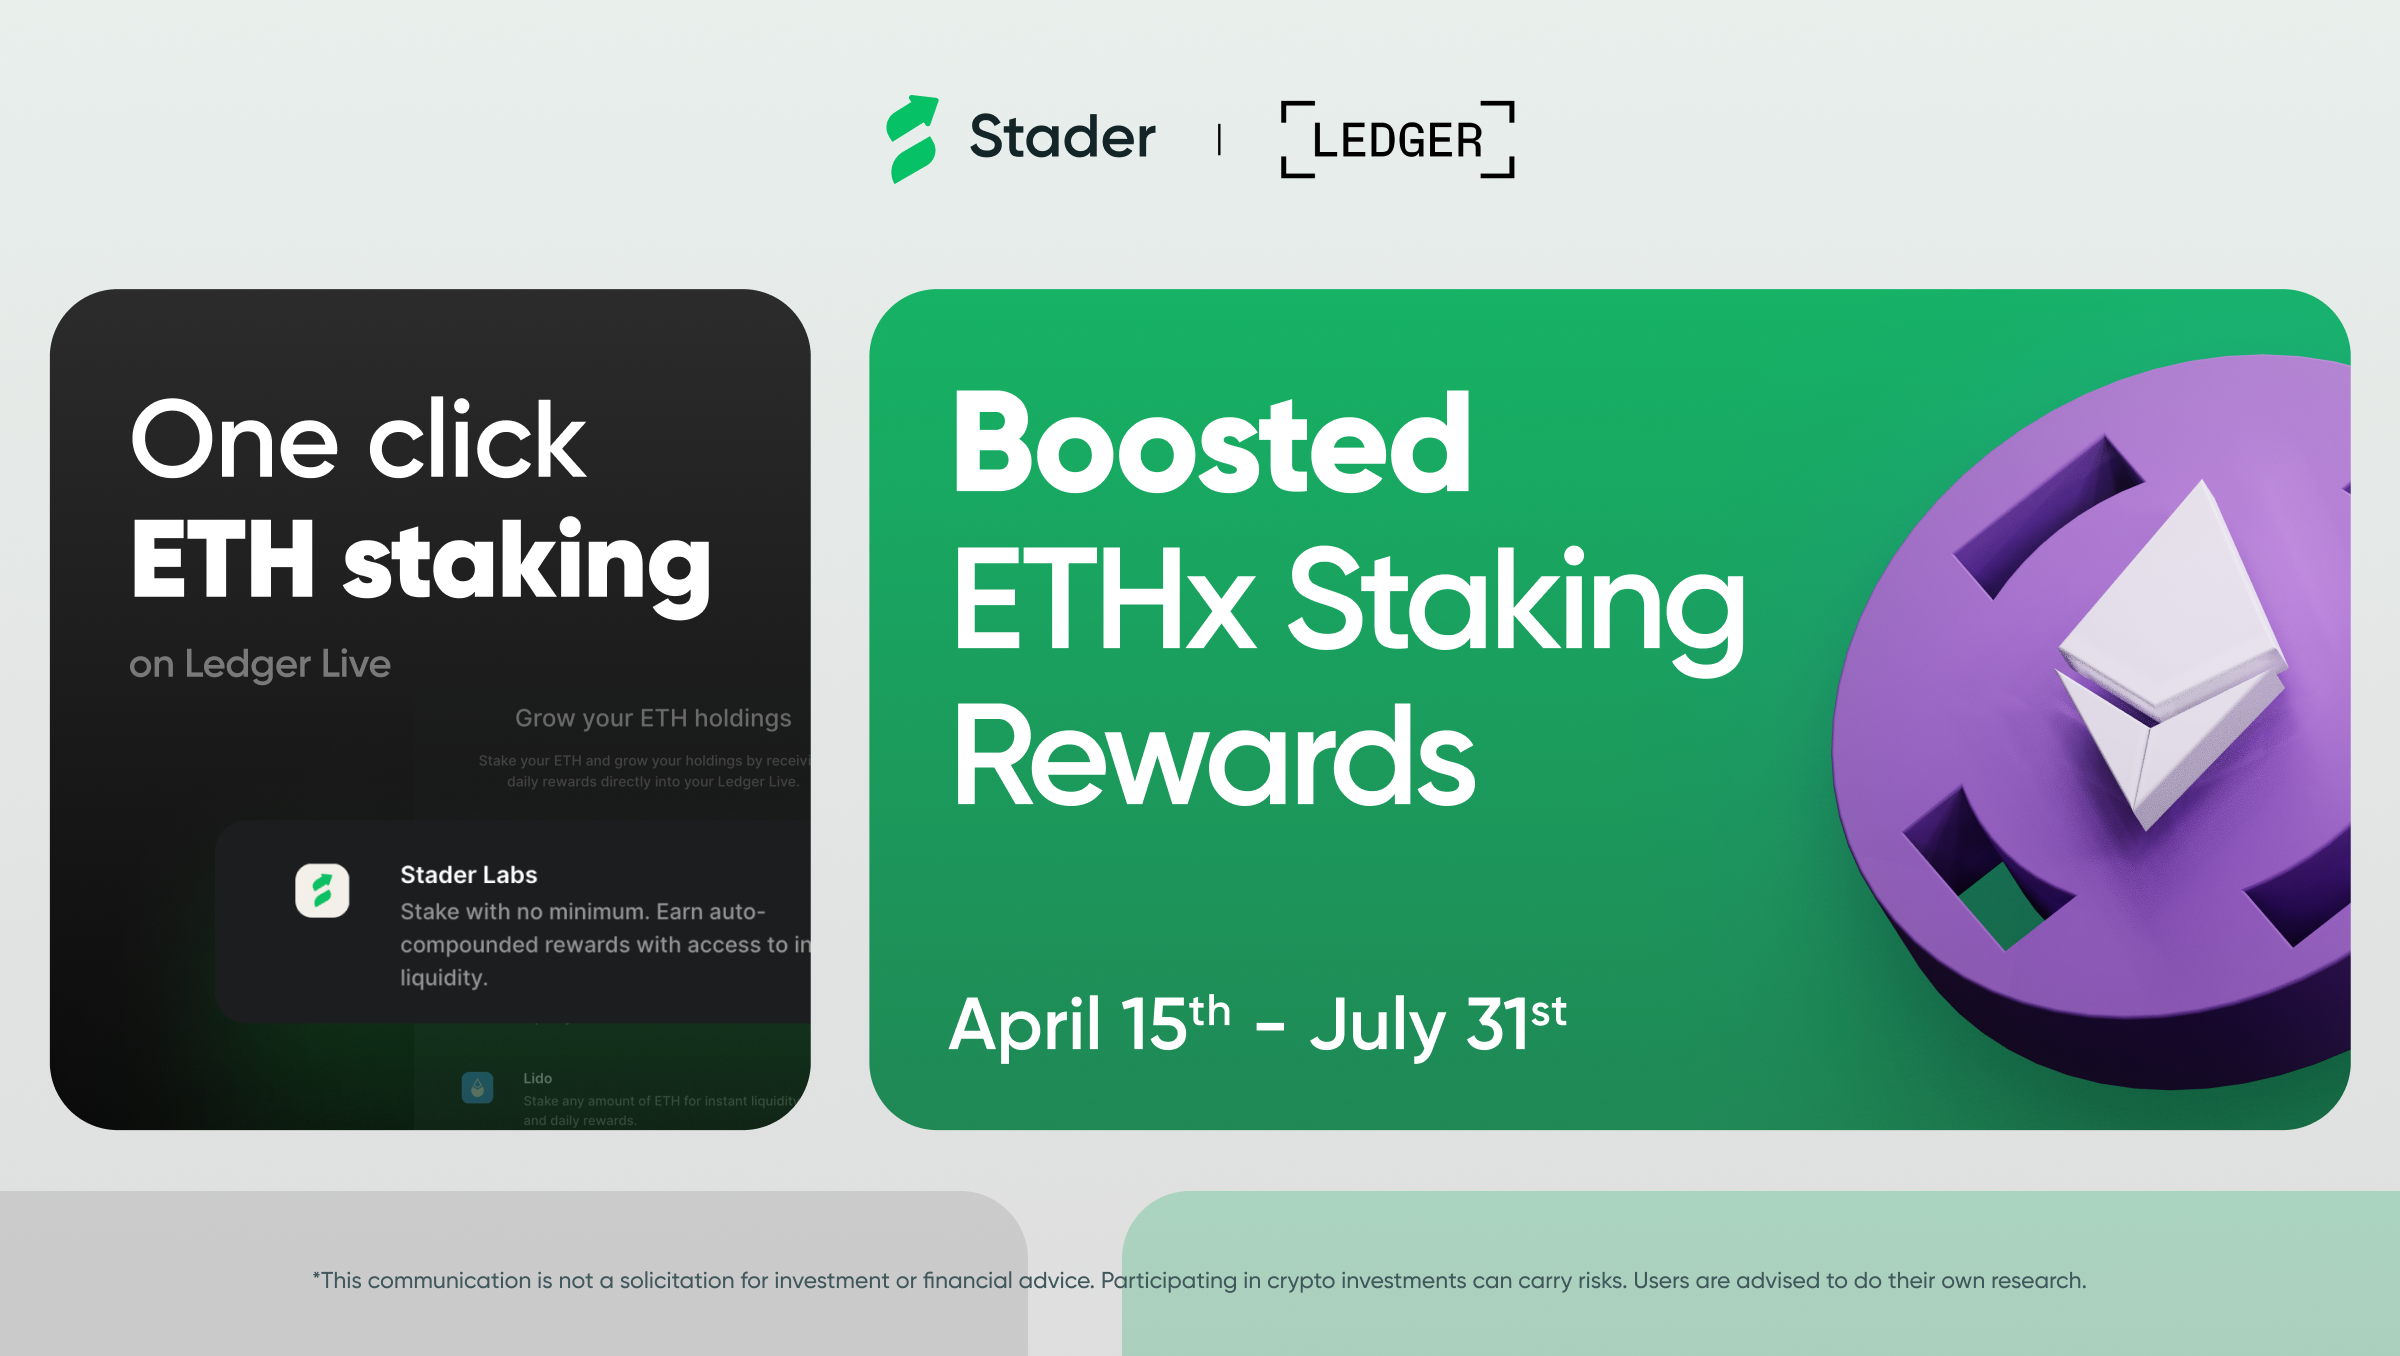 Get highest boosted ETH staking rewards with ETHx & Ledger Live.